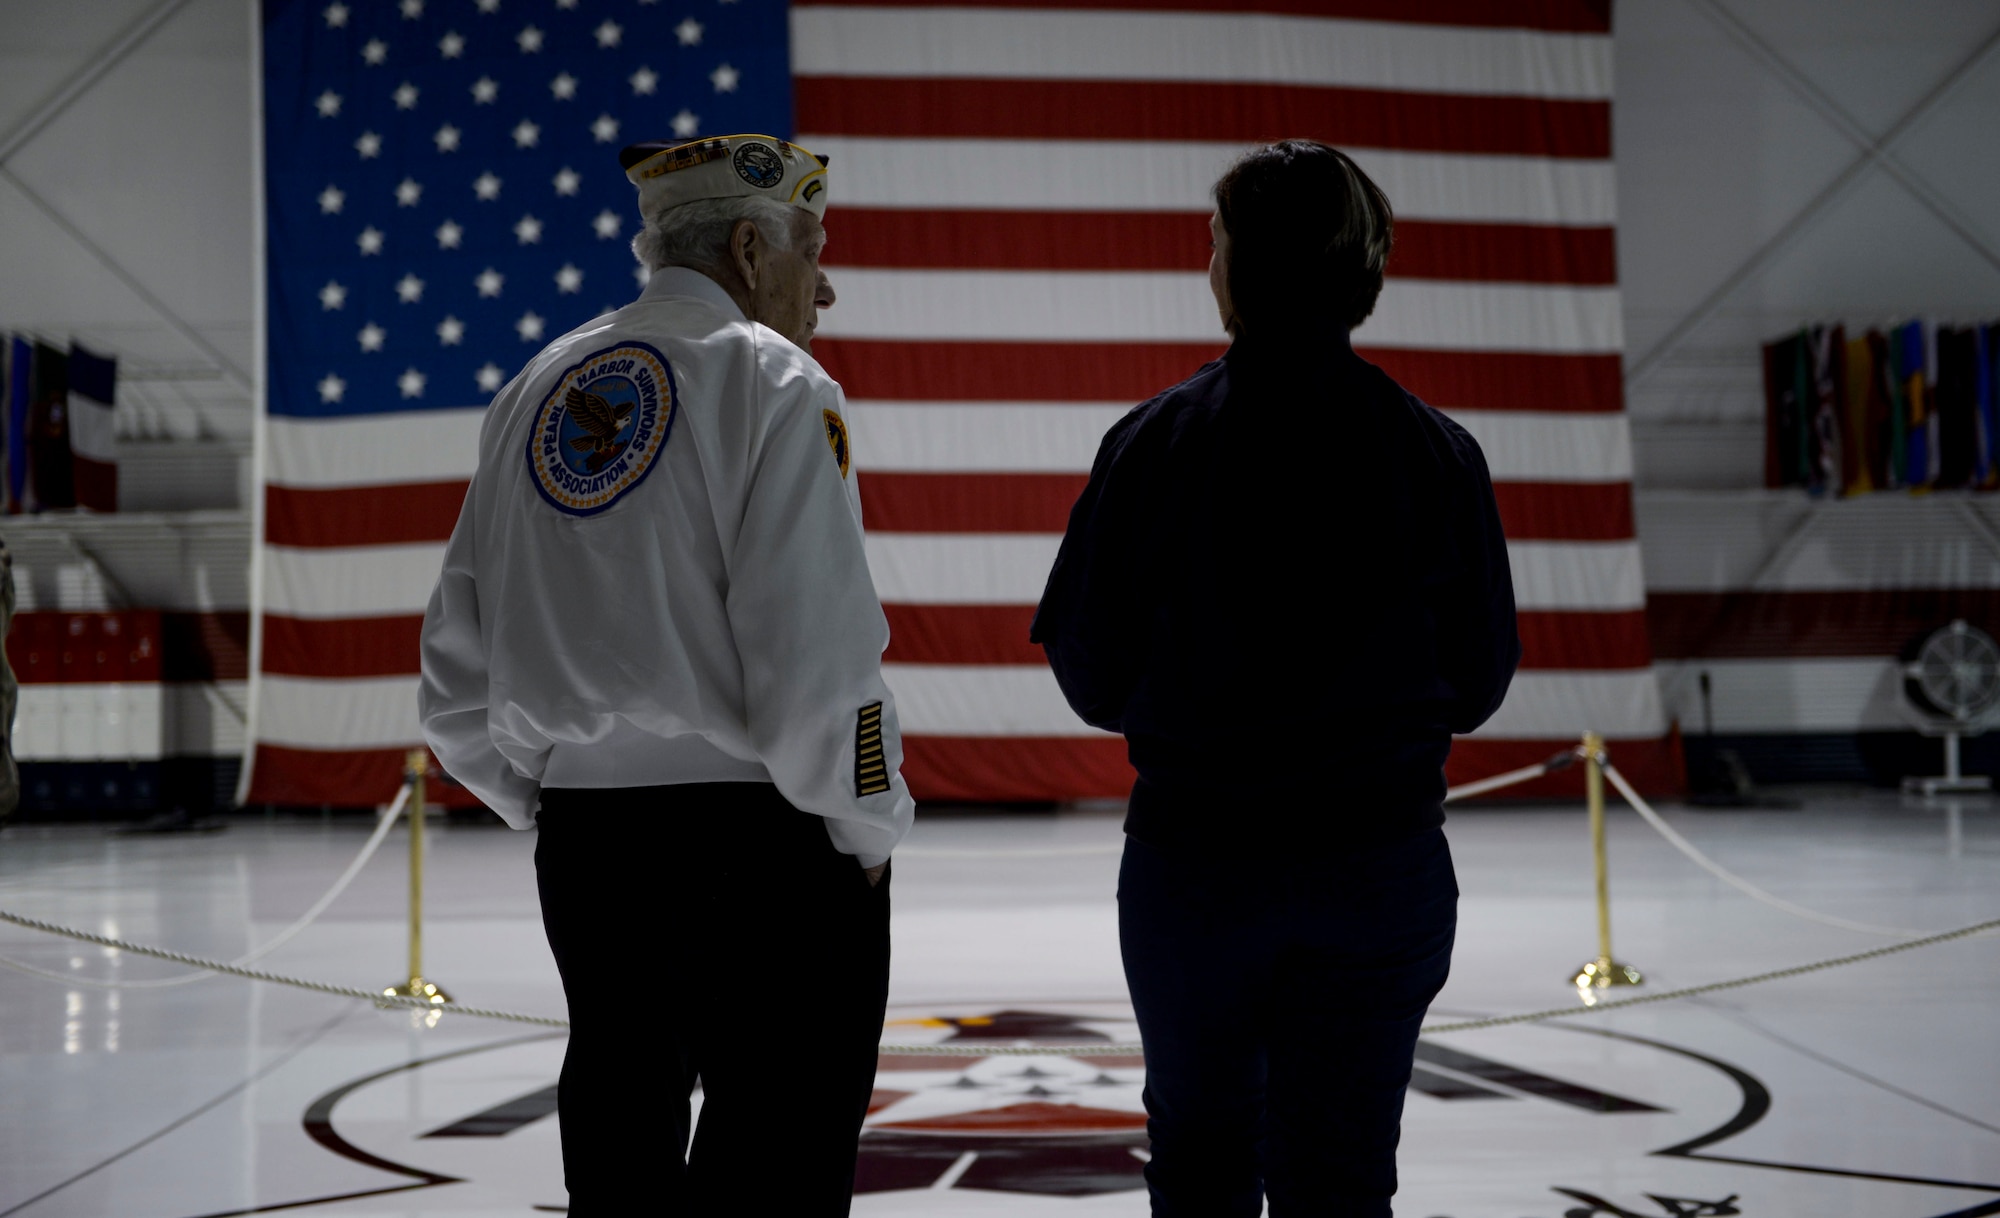 Ed Hall, Pearl Harbor Survivor, speaks with Master Sgt. Christine Powers, Public Affairs superintendent for the Thunderbirds, Dec. 7, 2018 in the Thunderbirds Hangar at Nellis Air Force Base, Nevada. Hall toured the Thunderbirds Museum and explored the hangar. (U.S. Air Force photo by Airman 1st Class Bailee A. Darbasie)